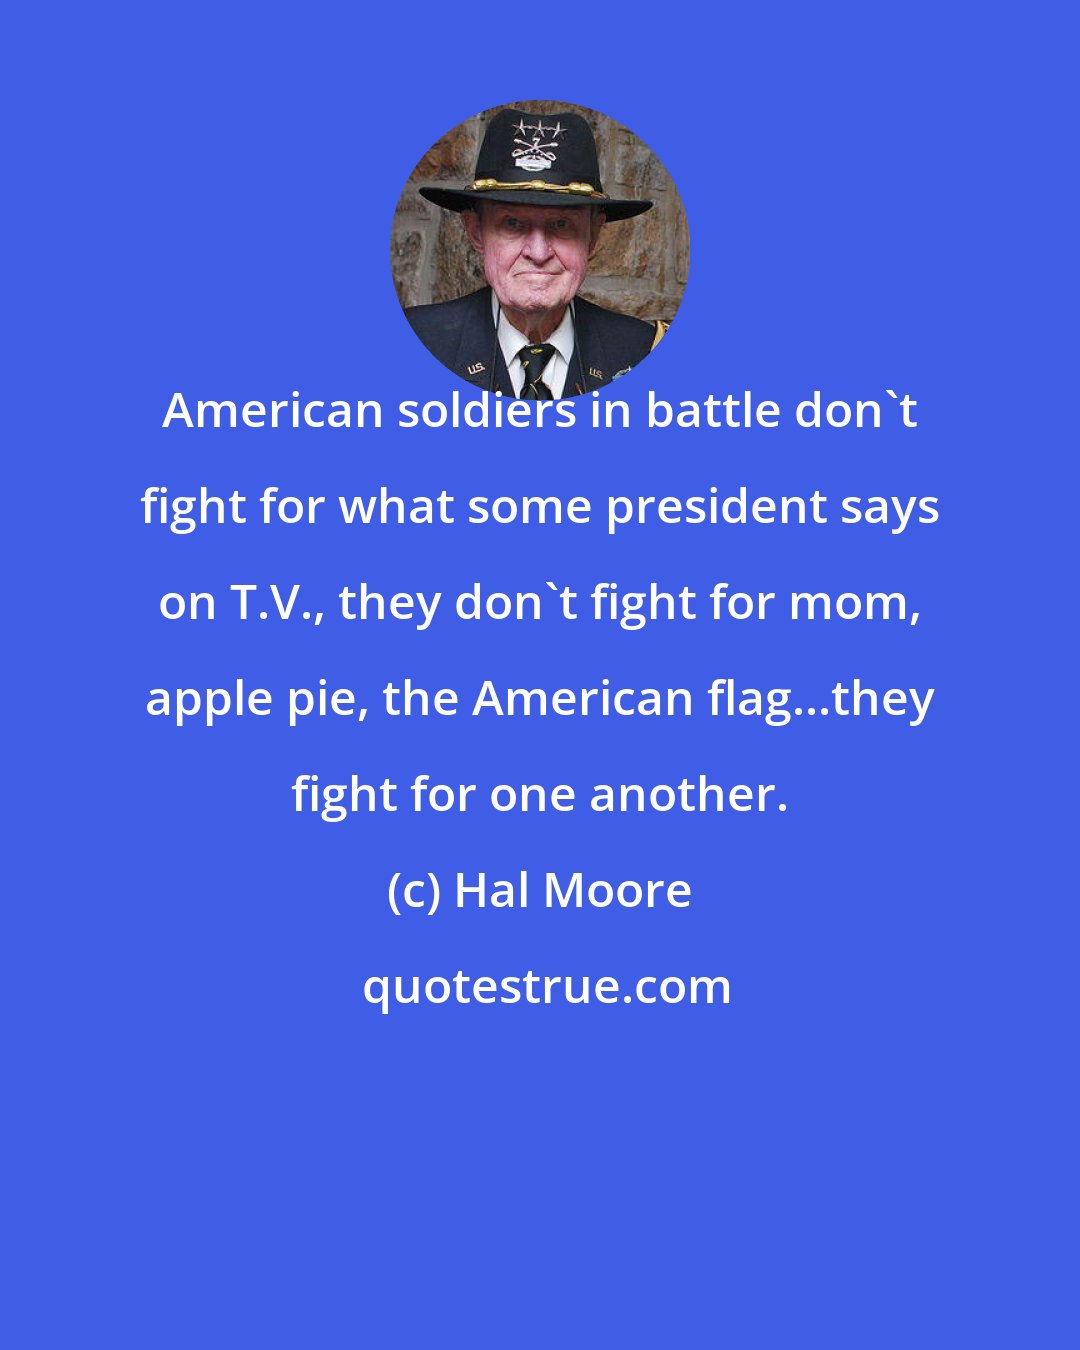 Hal Moore: American soldiers in battle don't fight for what some president says on T.V., they don't fight for mom, apple pie, the American flag...they fight for one another.